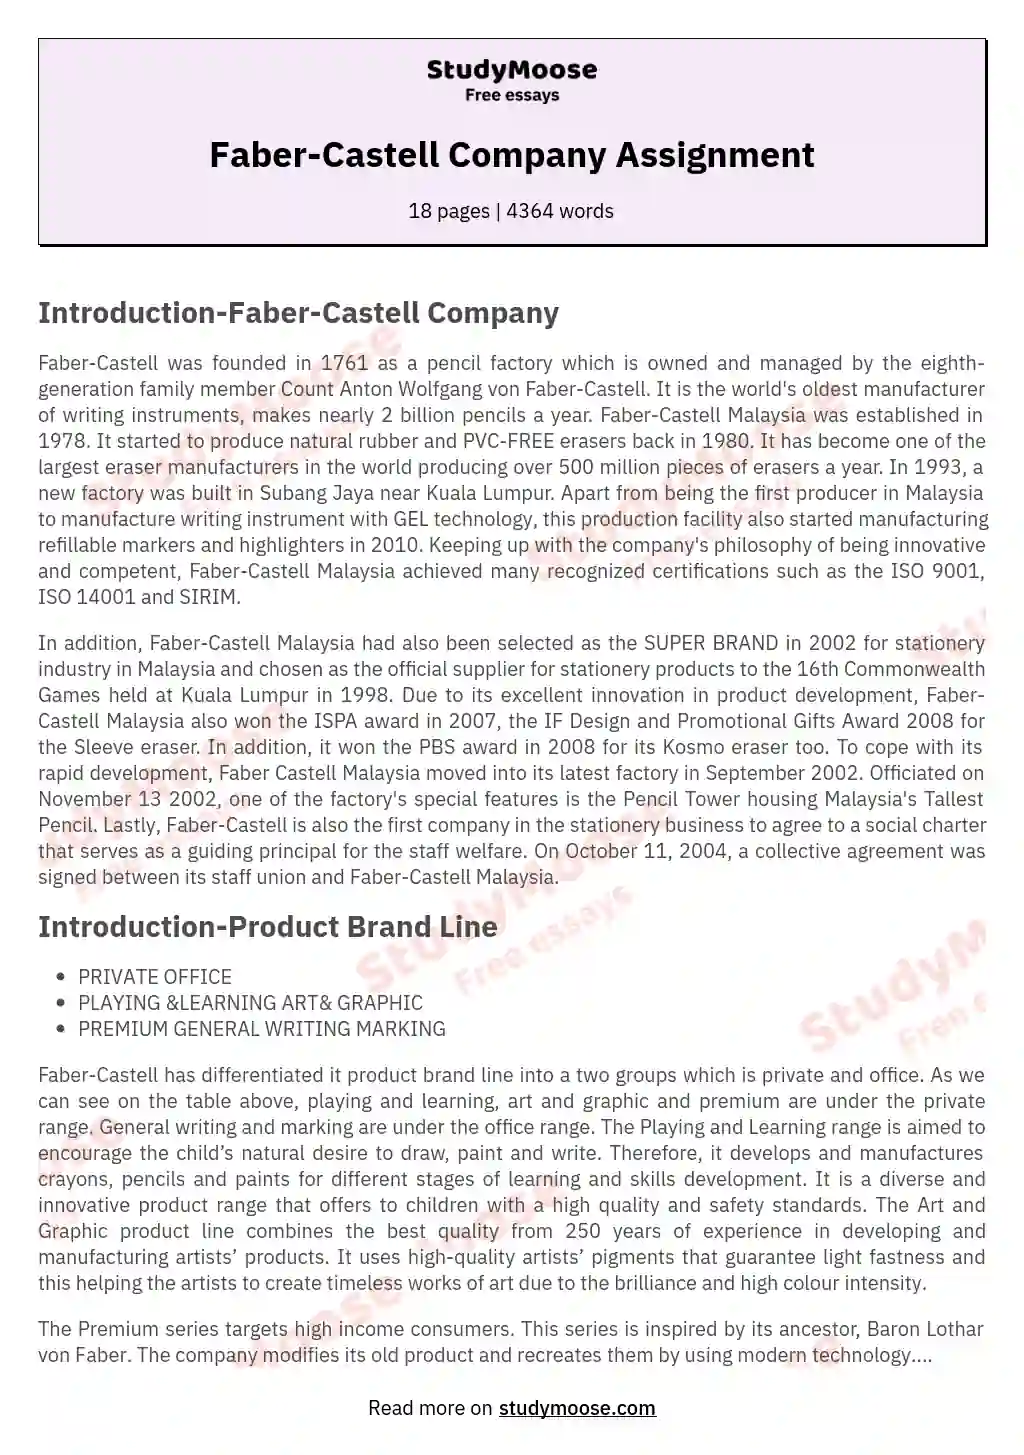 Faber-Castell Company Assignment essay